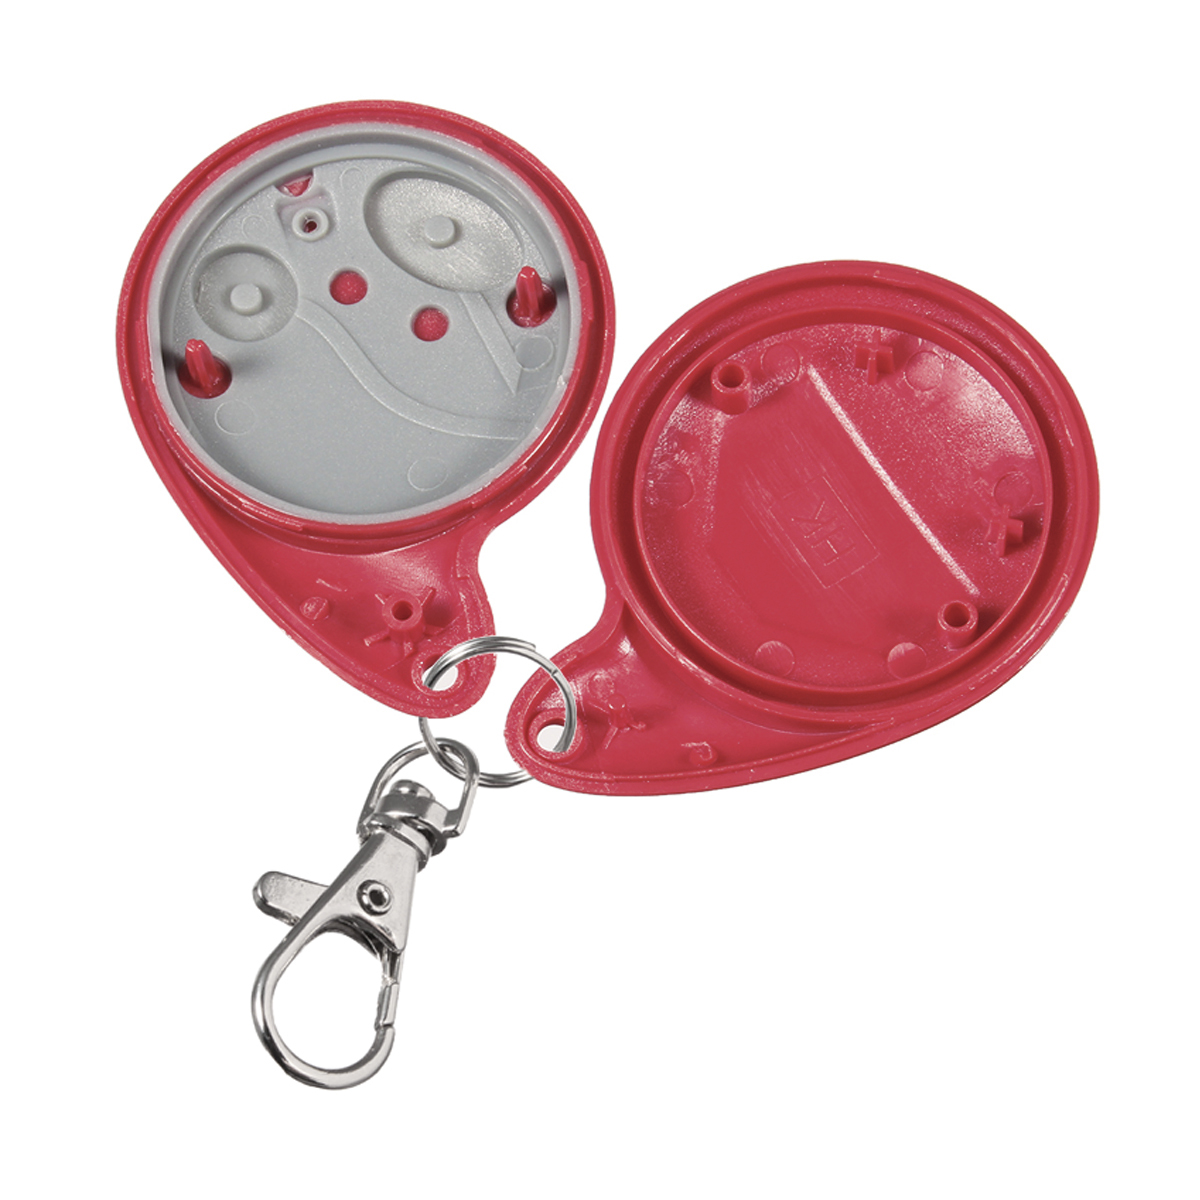 2-Buttons-Remote-Keychain-Ring-Portable-Fishing-Hiking-Keychain-For-Toyota-1642660-6